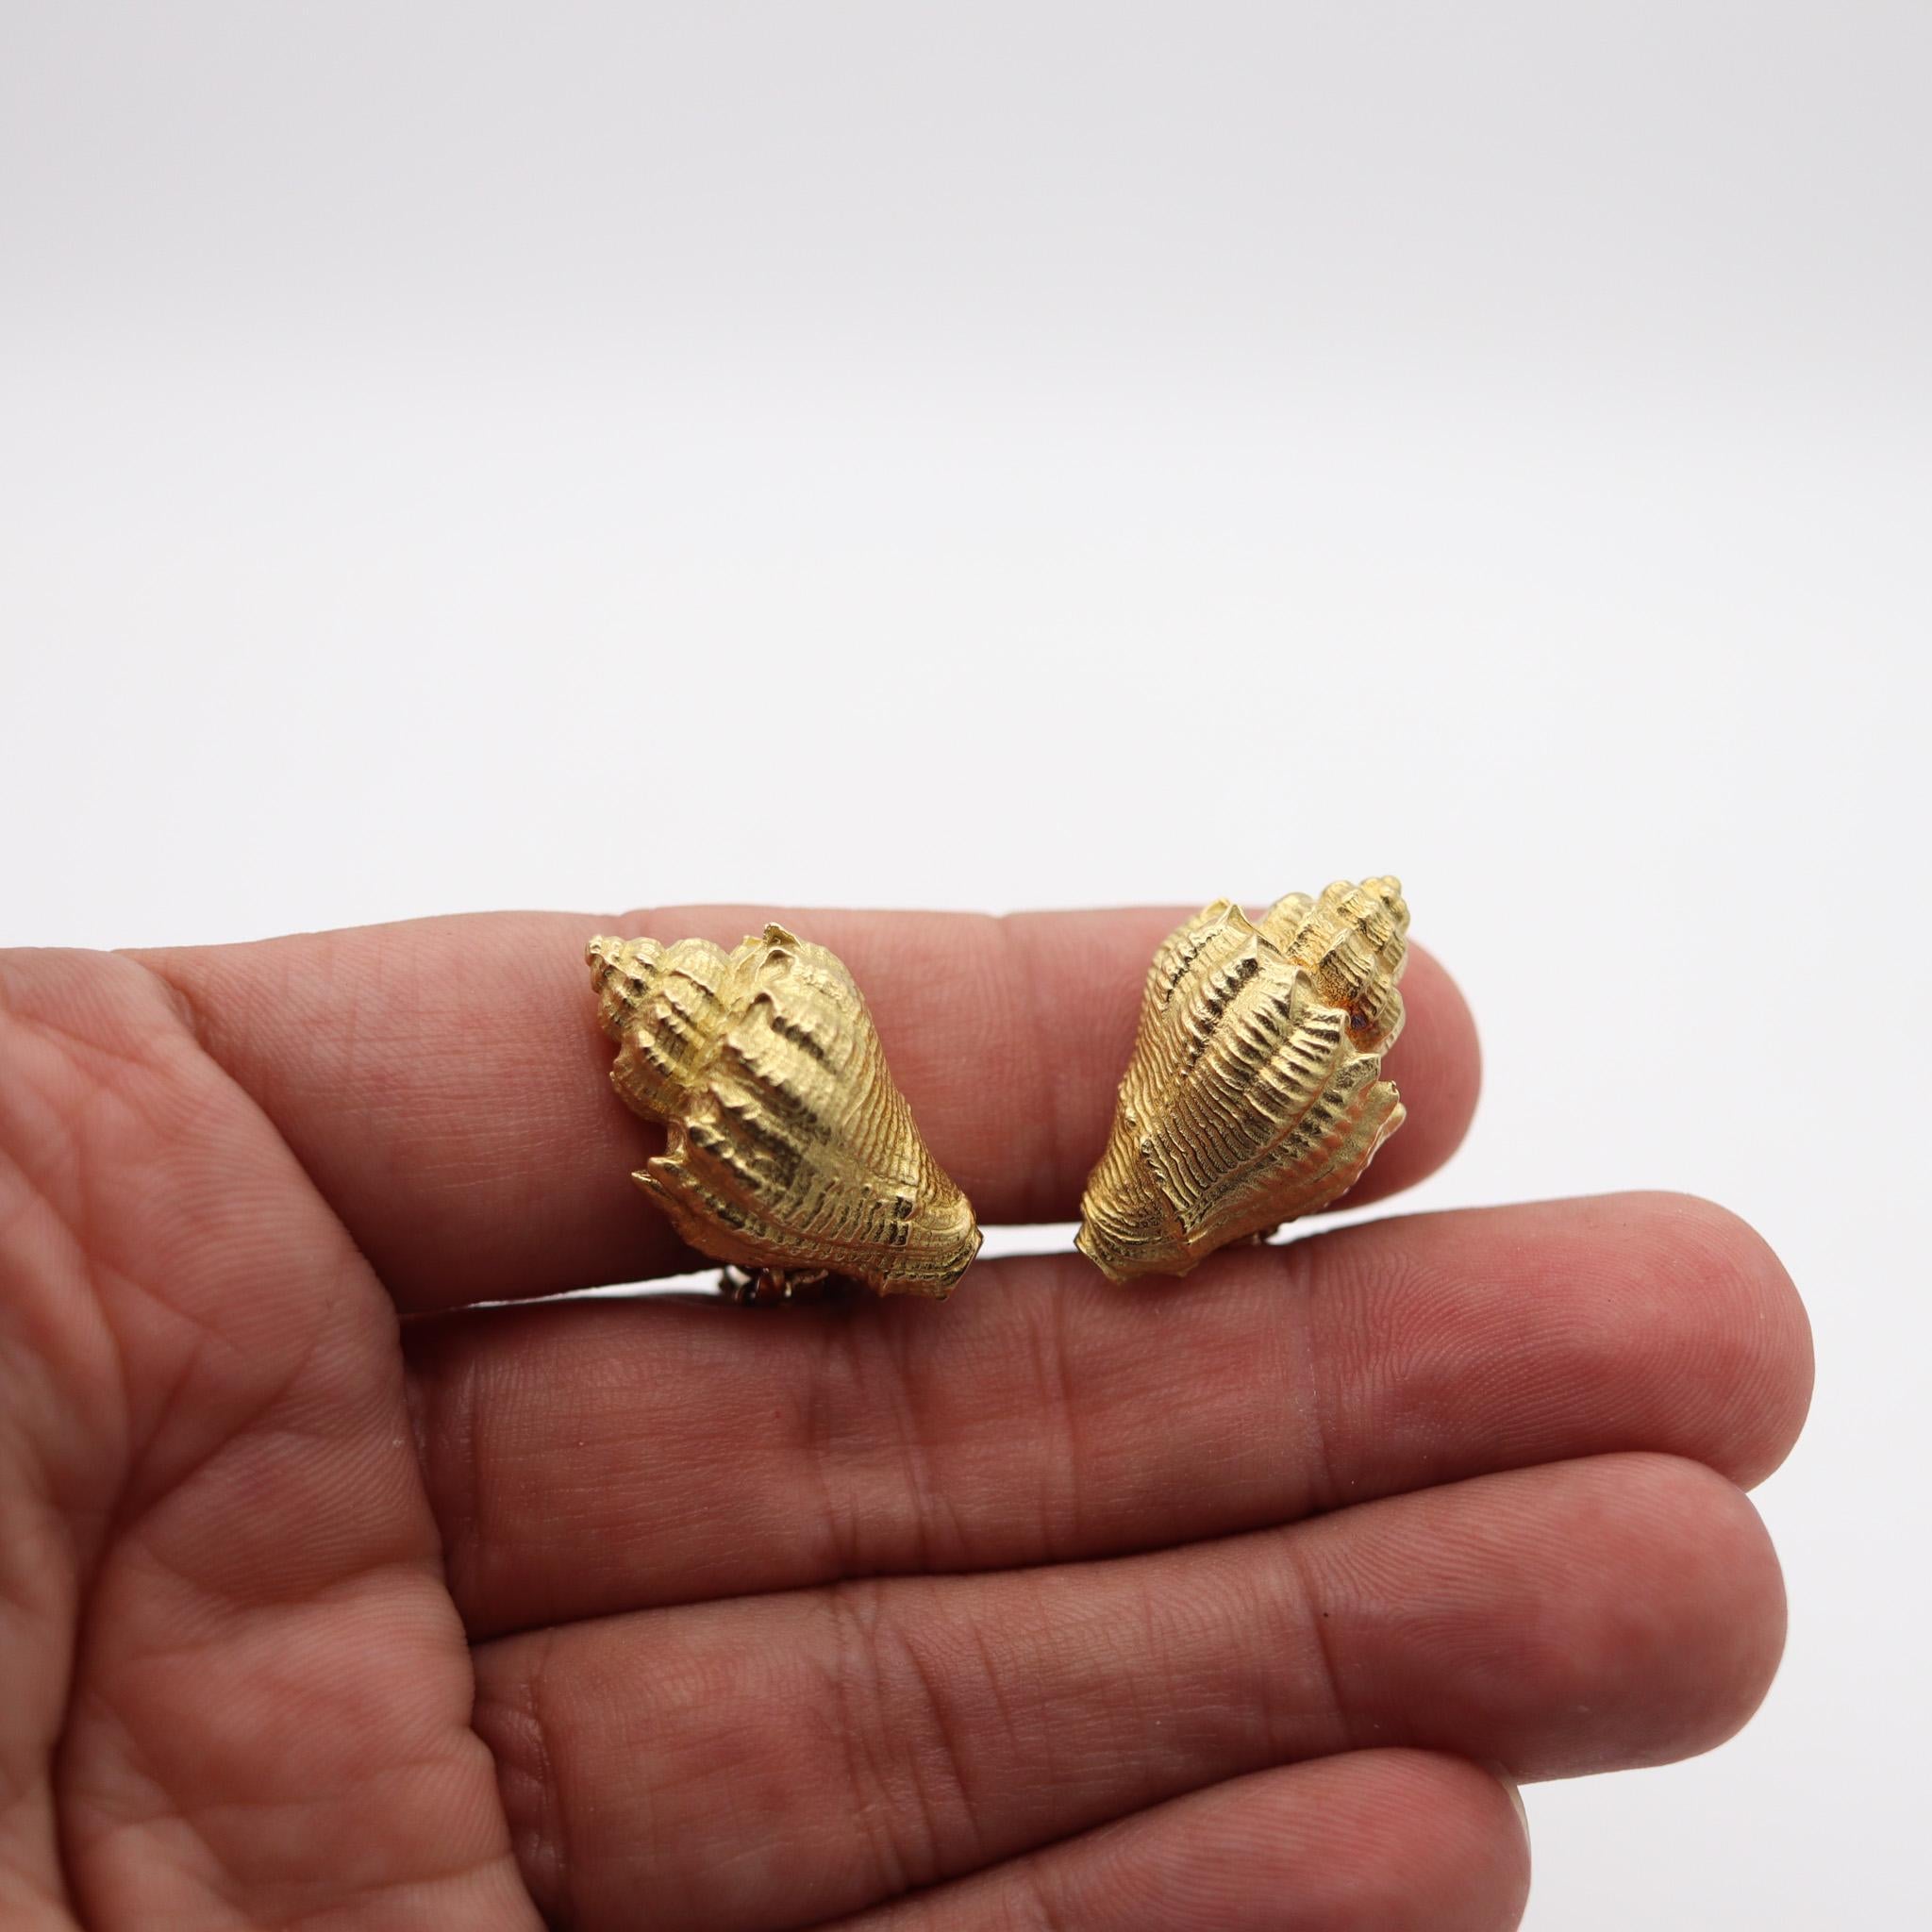 Tiffany & Co. 1970 George Schuler Seashells Clips Earrings In 18Kt Yellow Gold In Excellent Condition For Sale In Miami, FL